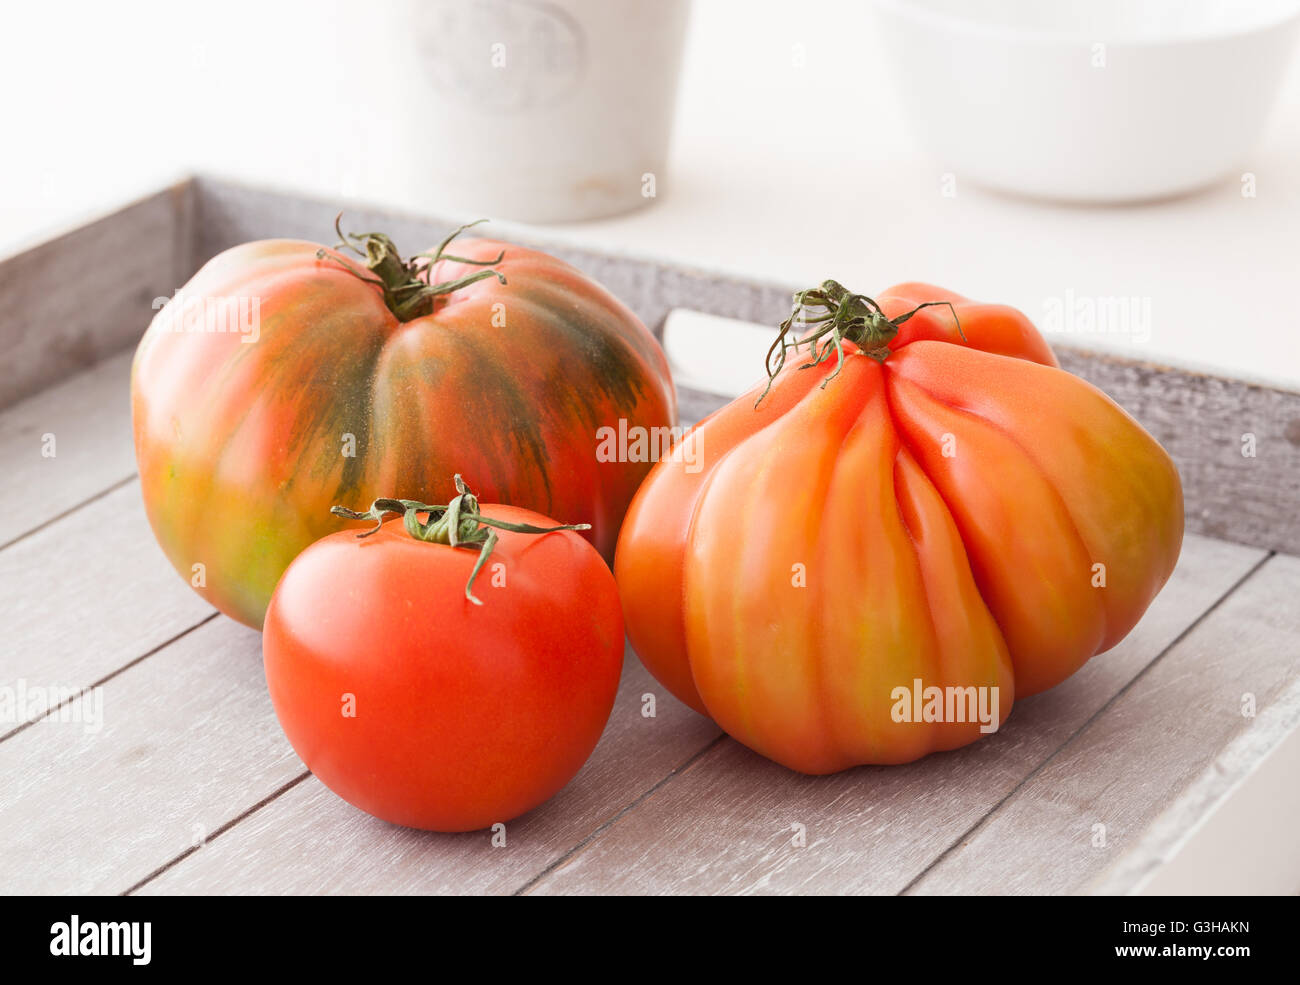 Three different organic heirloom tomatoes from Spain. Stock Photo